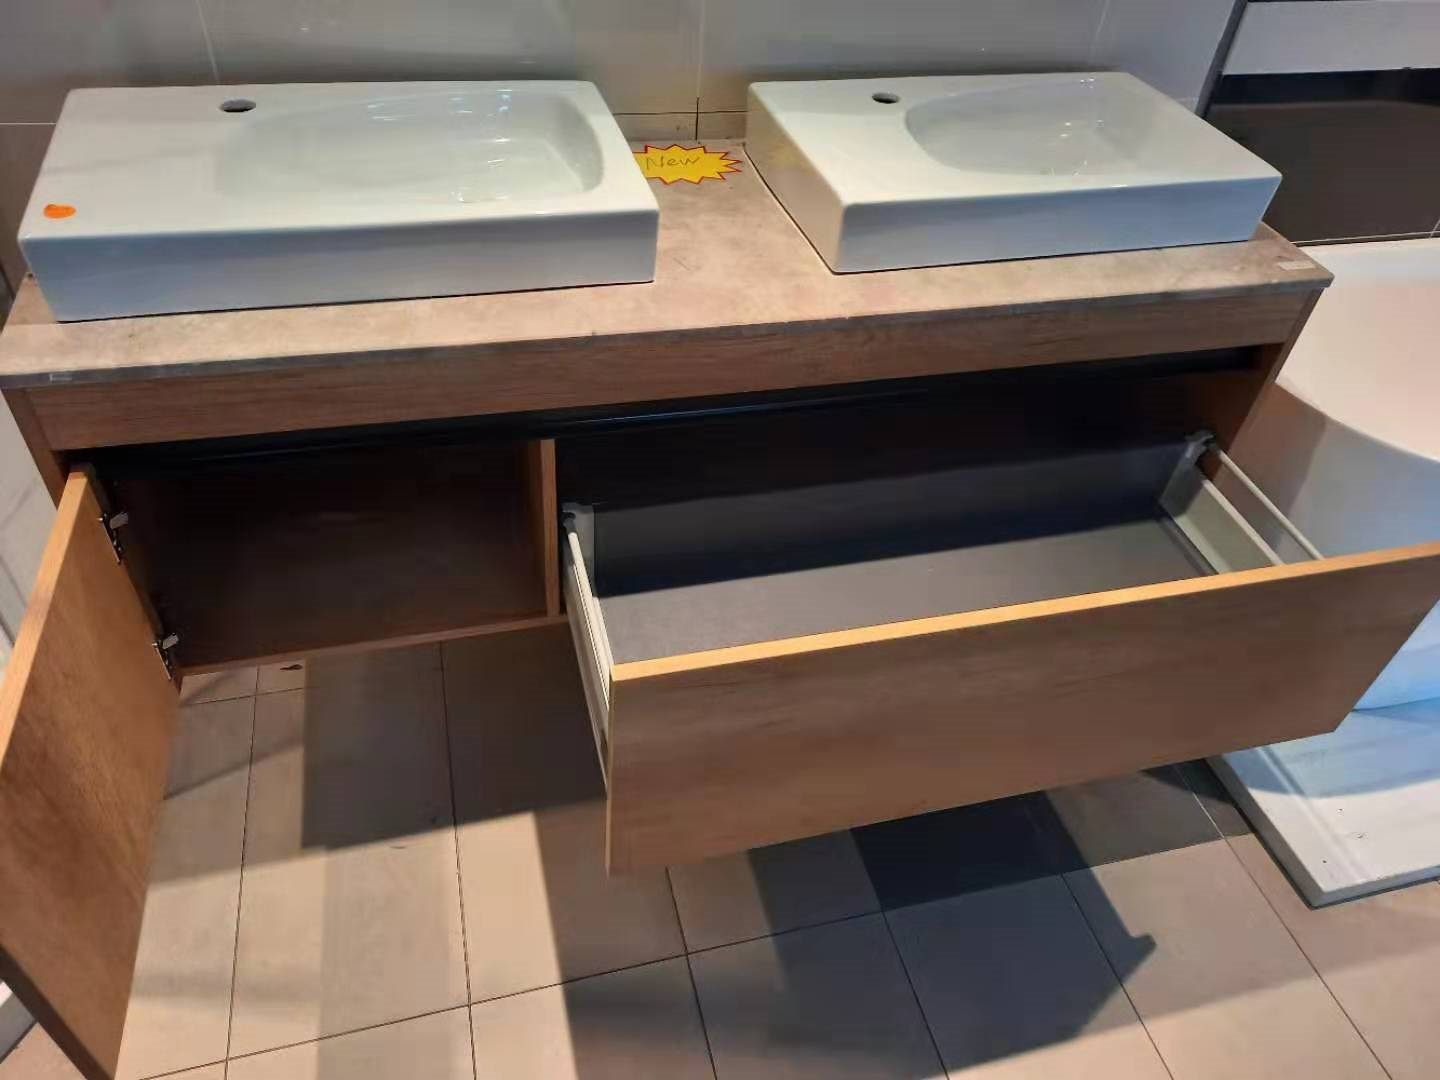 WALL HANG 1500MM MARBLE BENCH PLYWOOD VANITY WITH CERAMIC BASIN